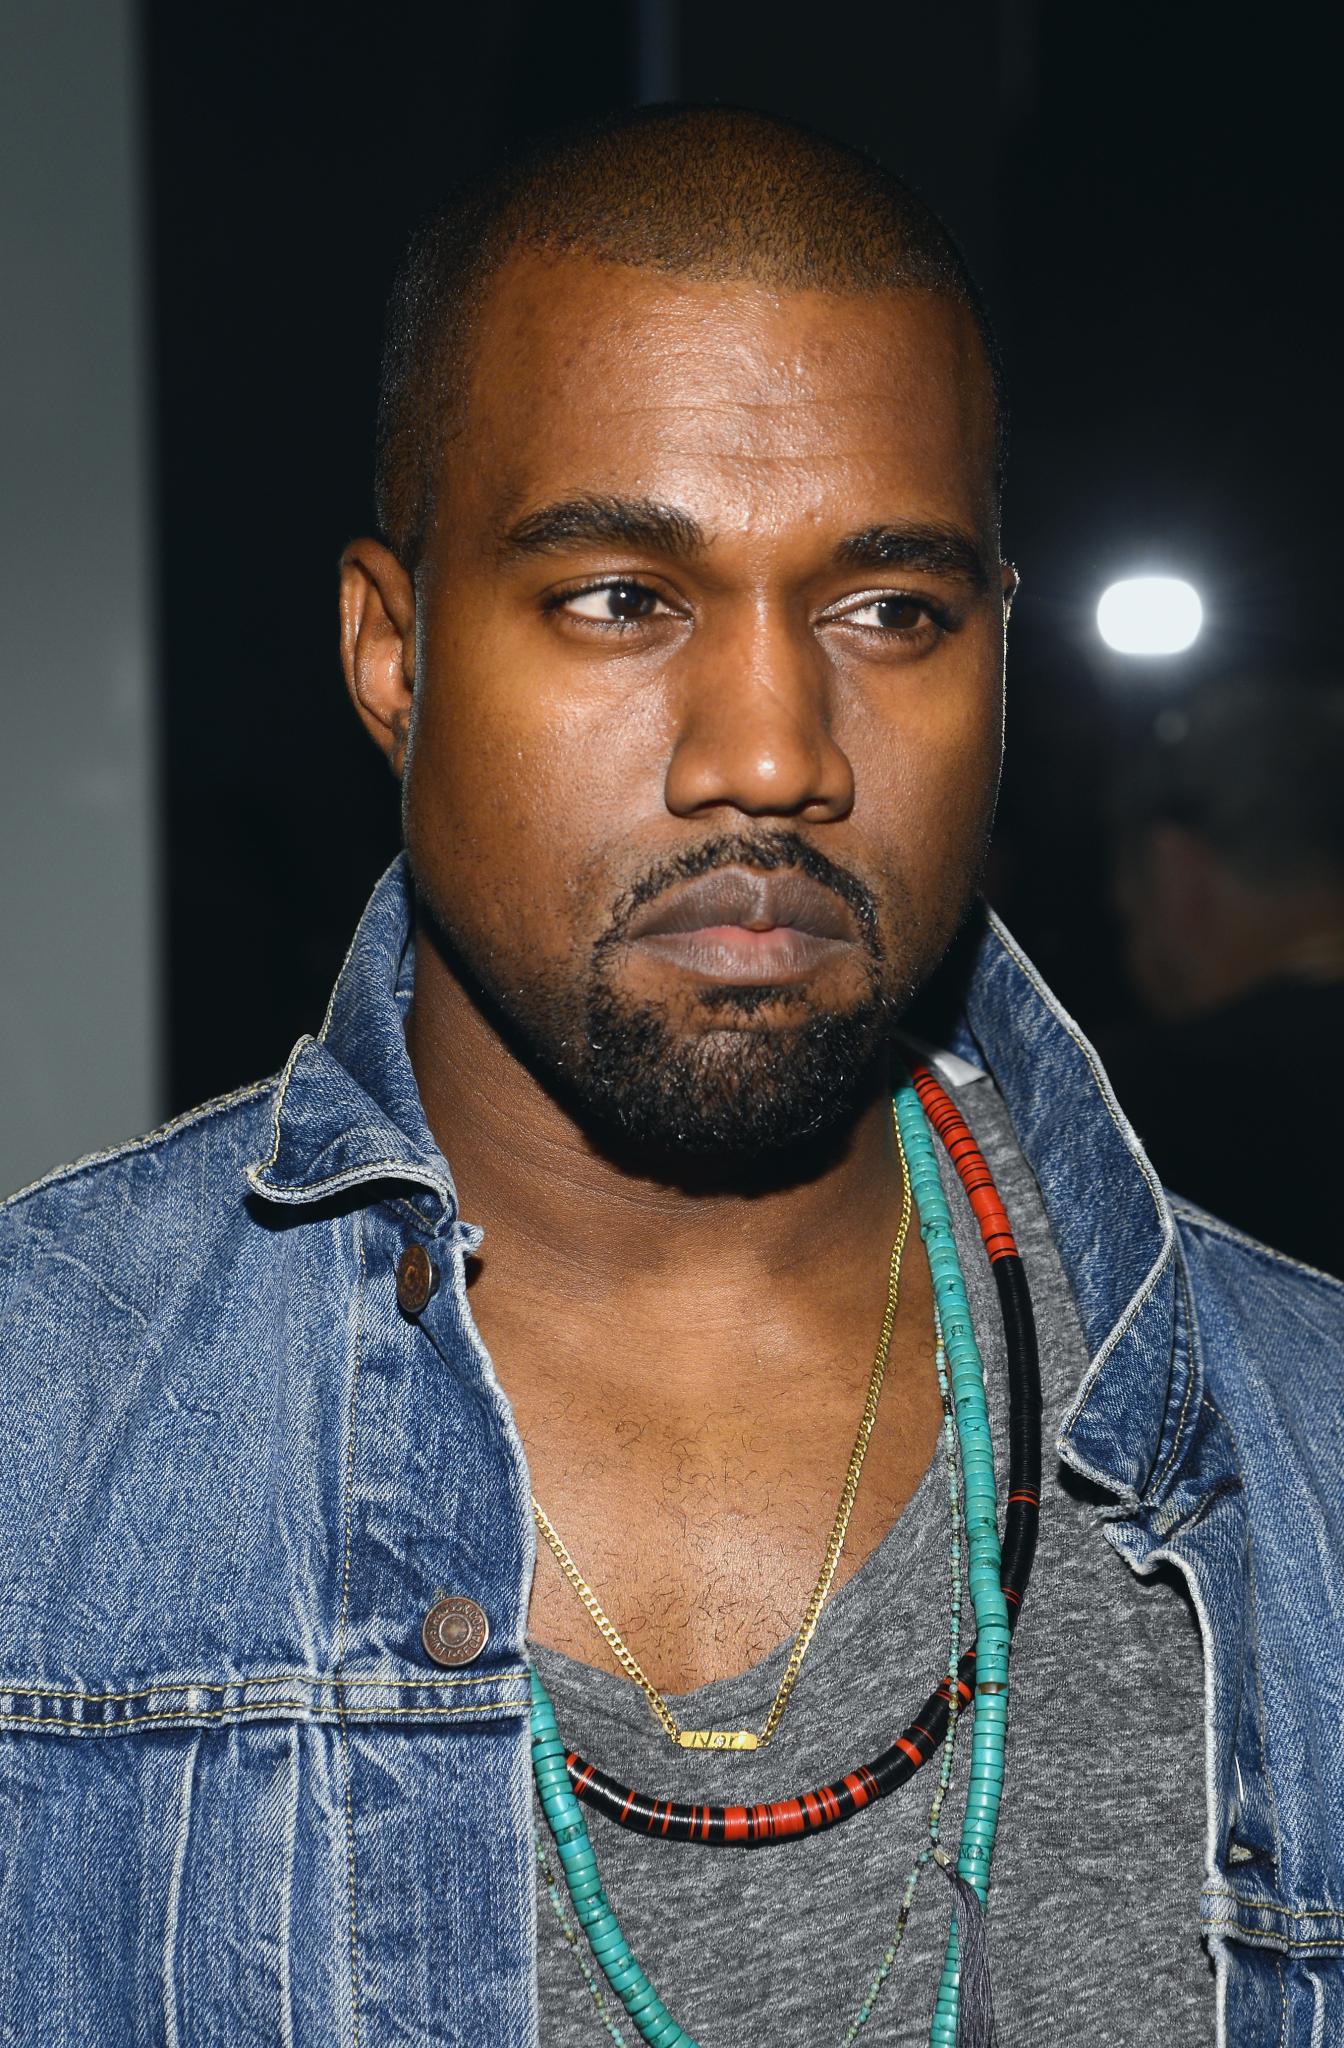 Kanye West Ordered to Take Anger Classes After Paparazzi Scuffle
